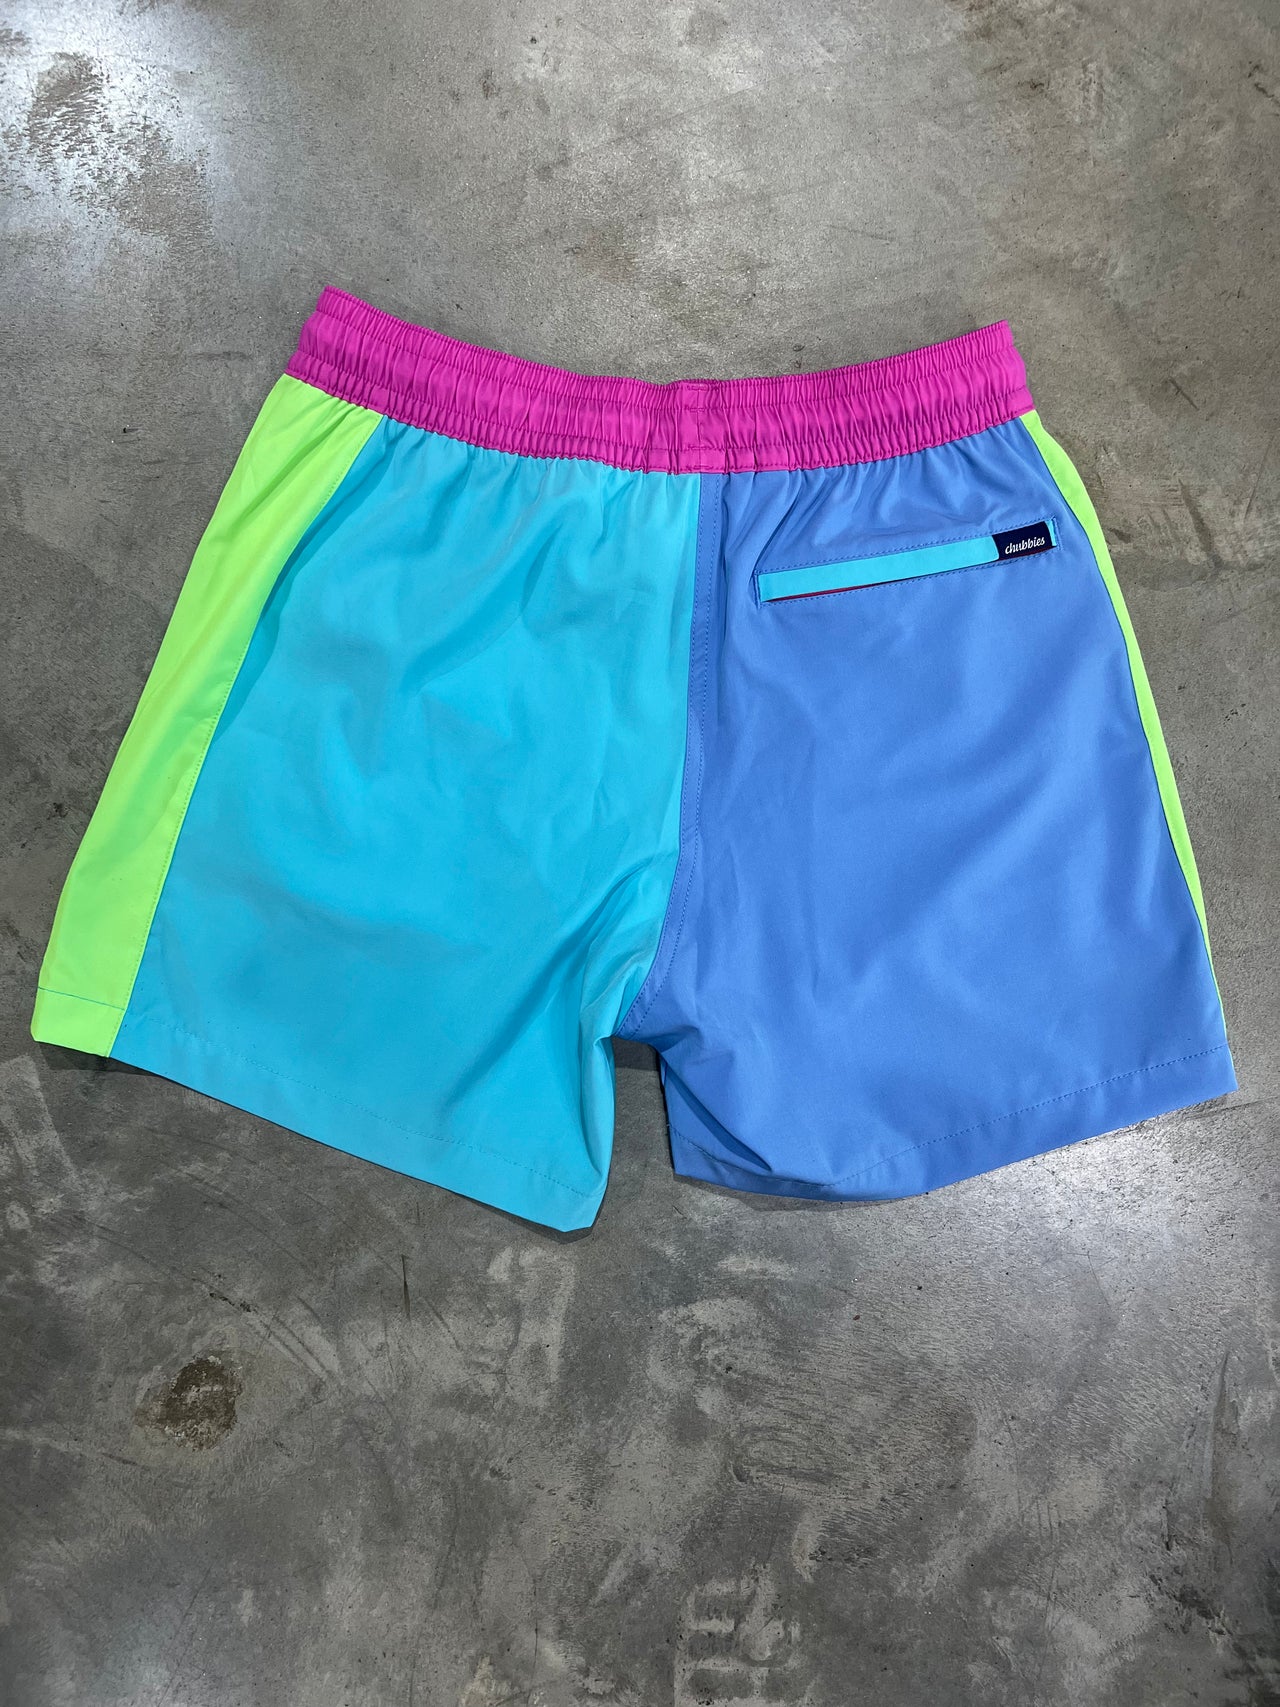 The Miracles 5.5" Classic Swim Trunks